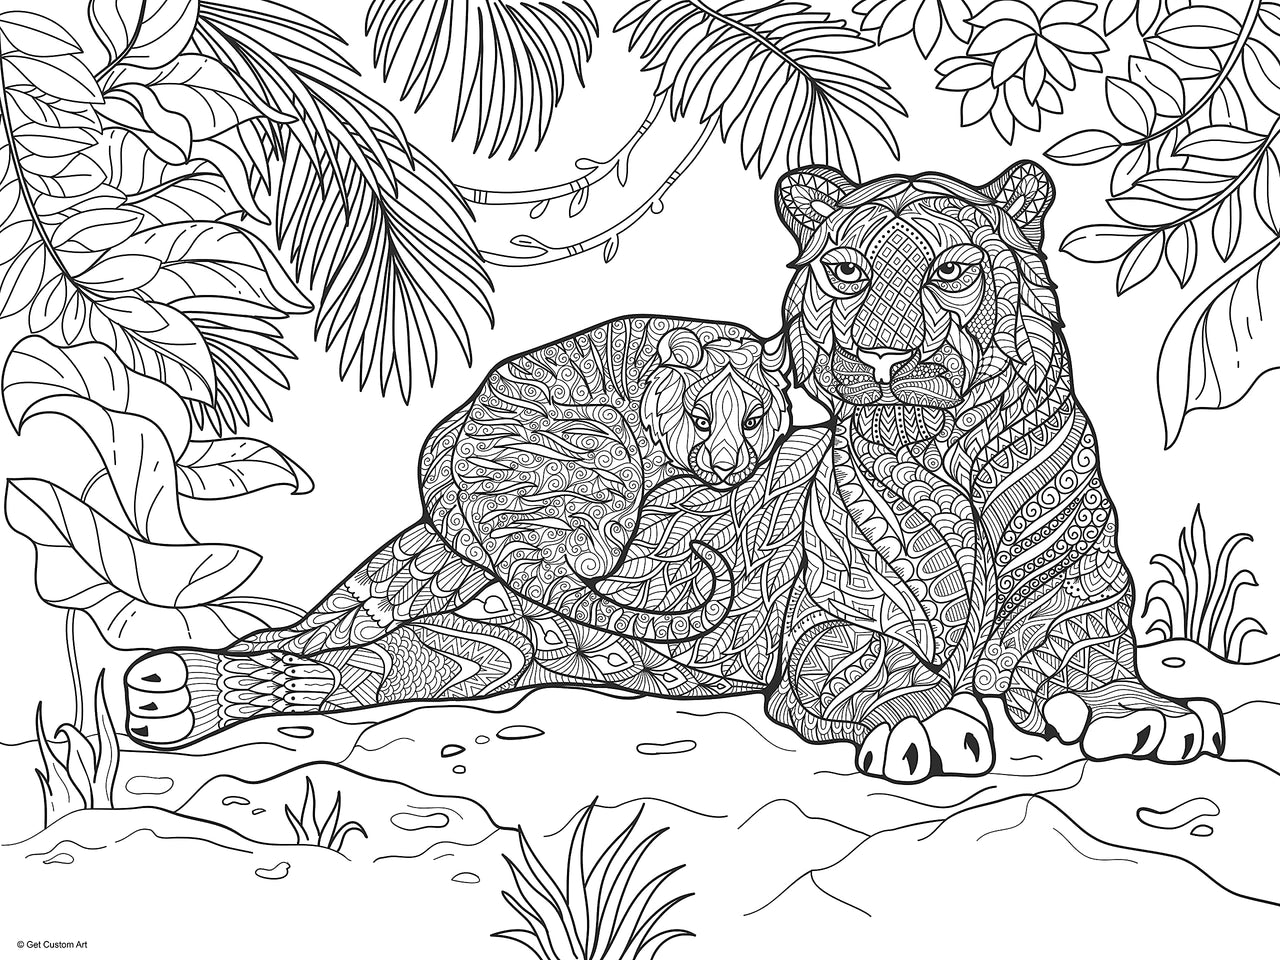 Tiger and Cub Coloring Poster – Animal Art for Kids and Adults | DIY Stress Relief Coloring Poster